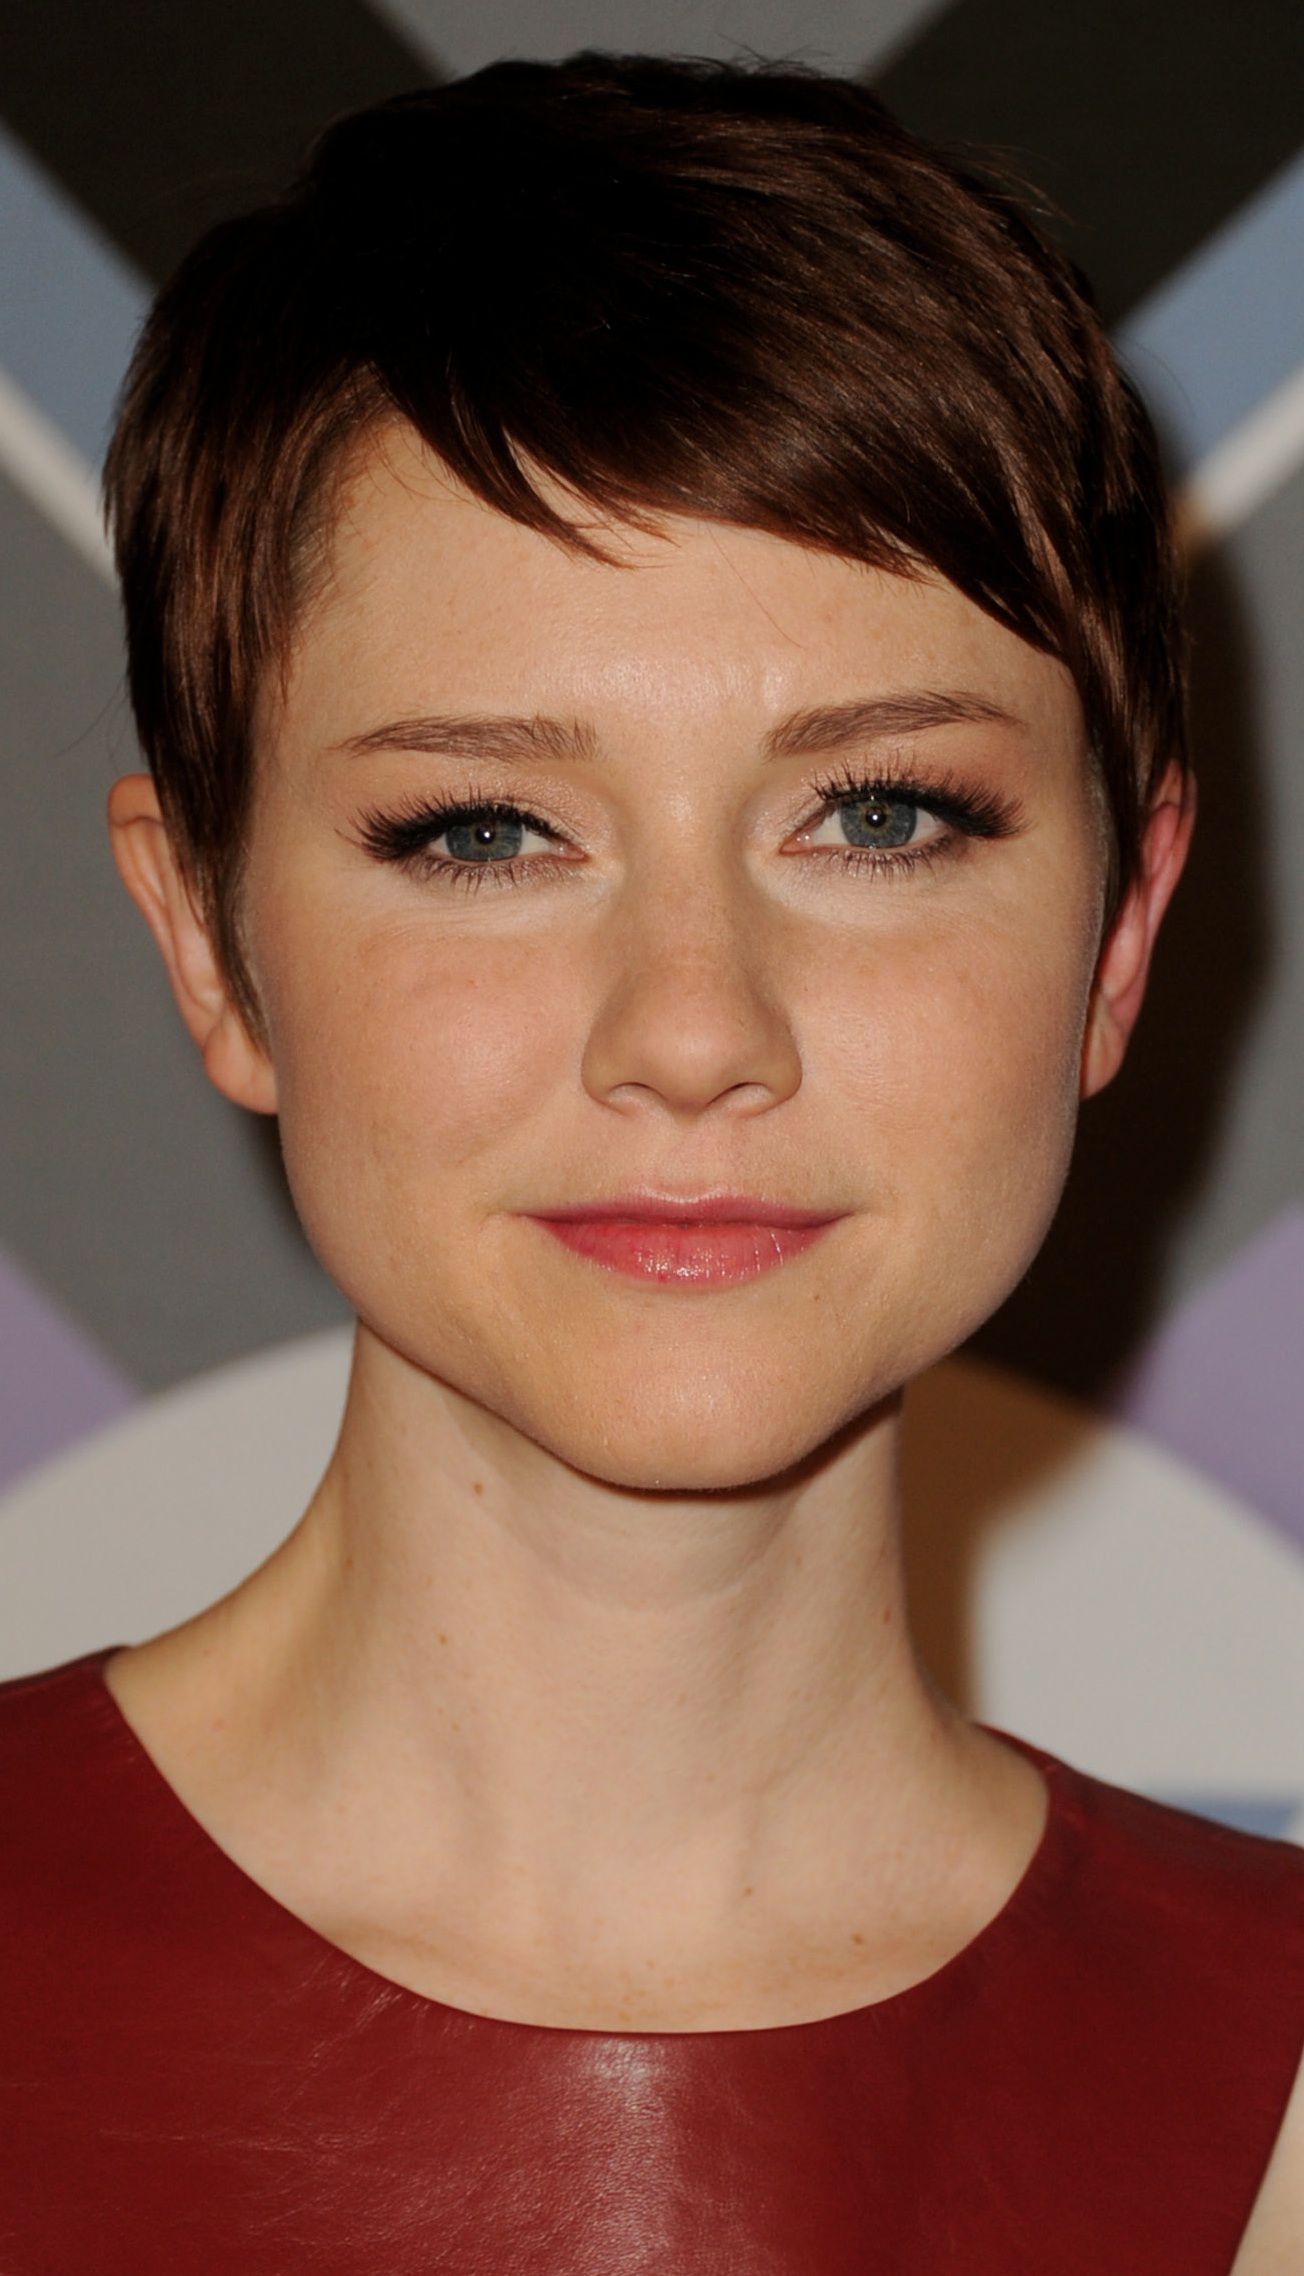 Pixie Haircuts : Short Pixie Haircuts With Long Bangs - 25+ : Every celebrity seems to be following this trend, lately.